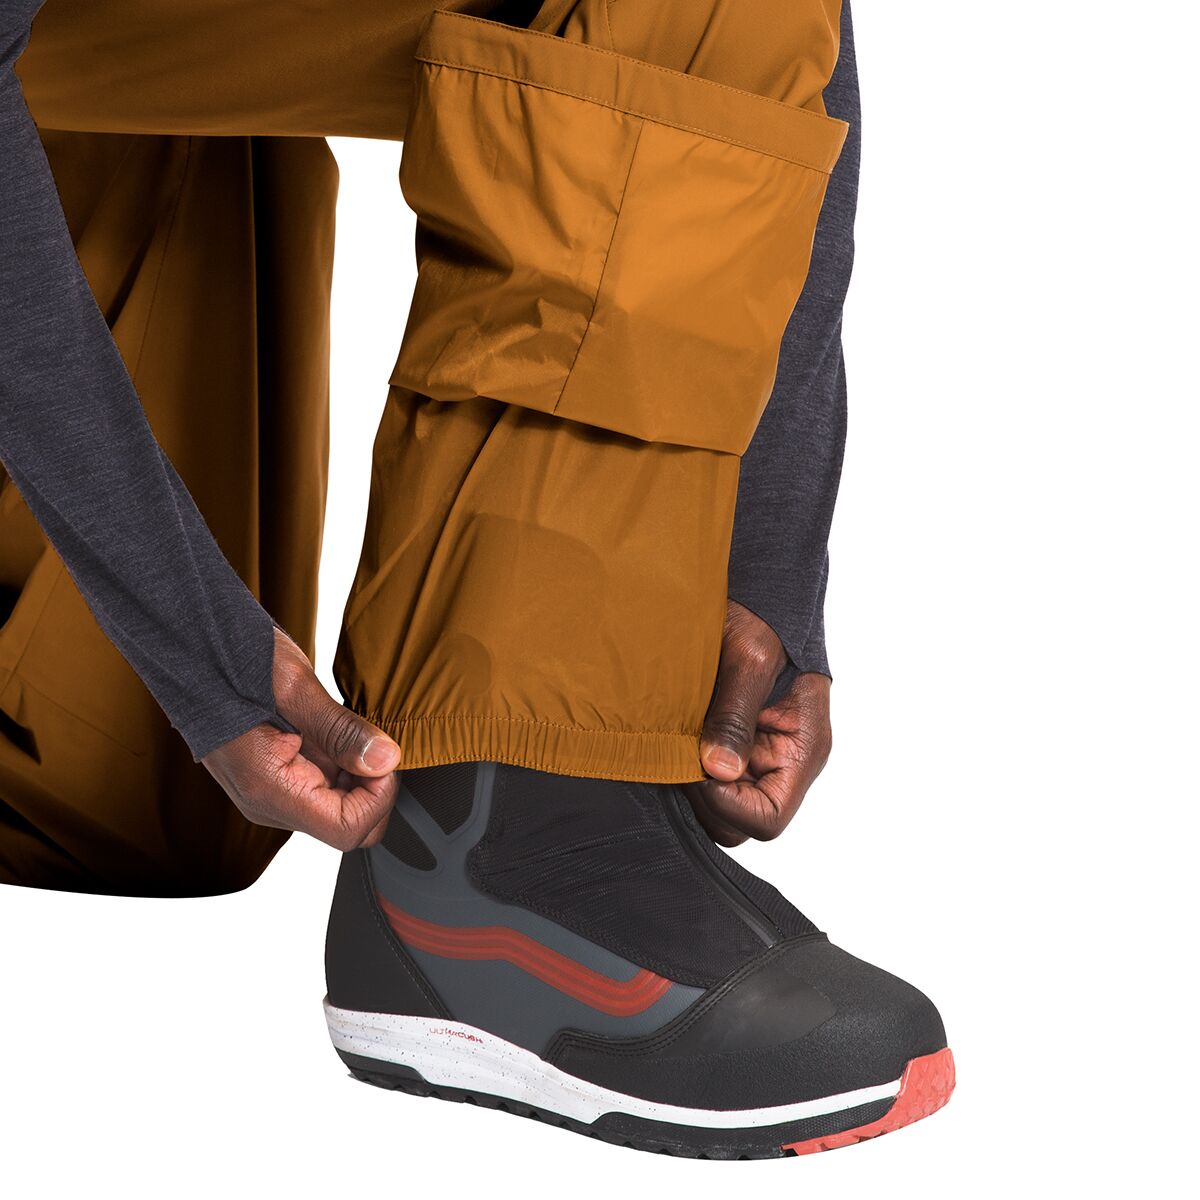 THE NORTH FACE   SEYMORE PANT